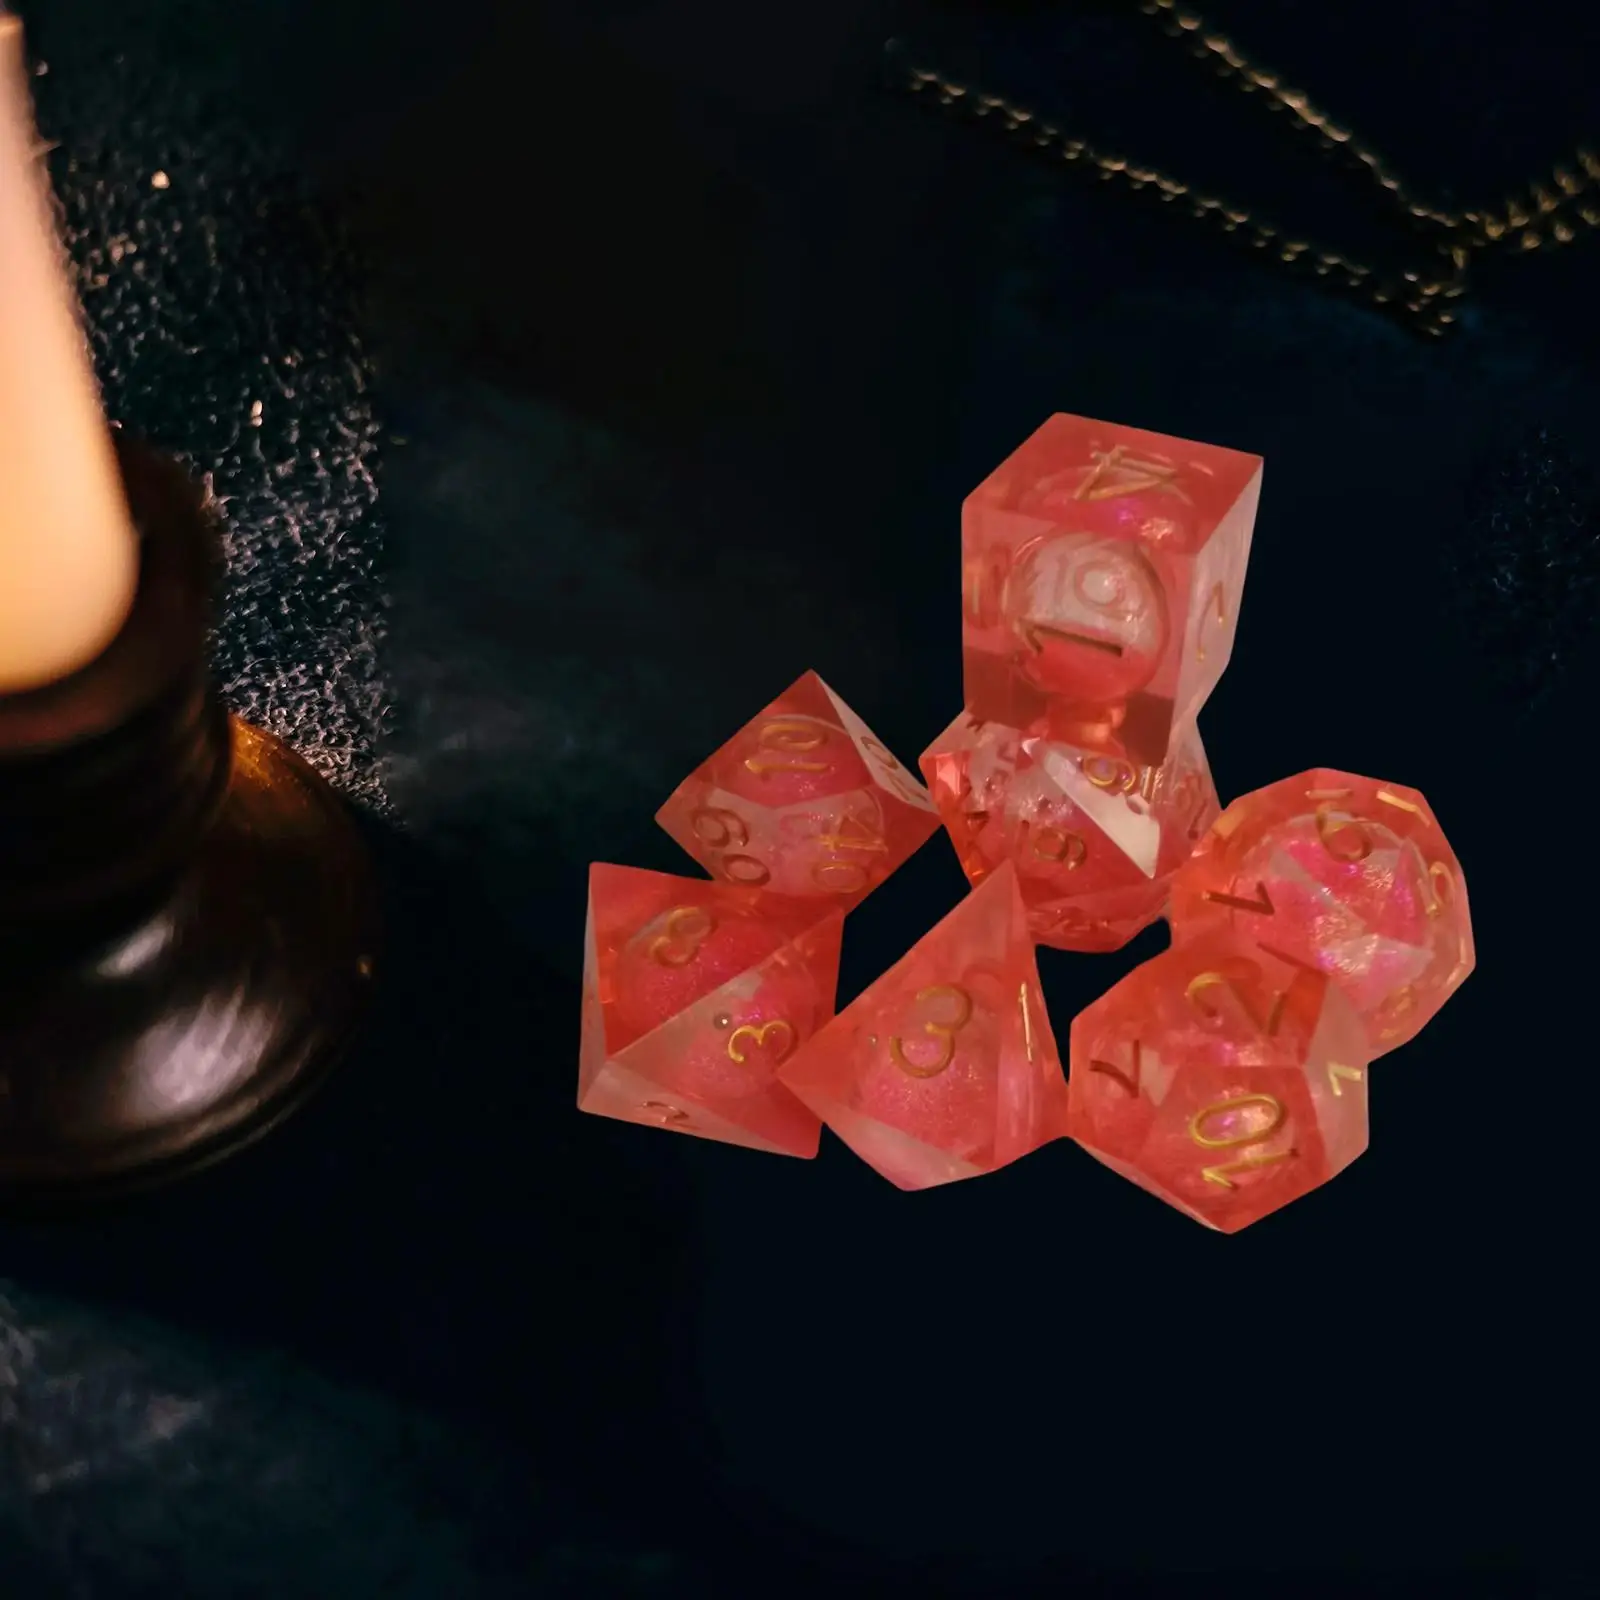 7 Pieces Multi Sided Game Dices Party Game Dices D20 D12 D10 D8 D6 D4 Polyhedral Dices dices Set for Party Card Games